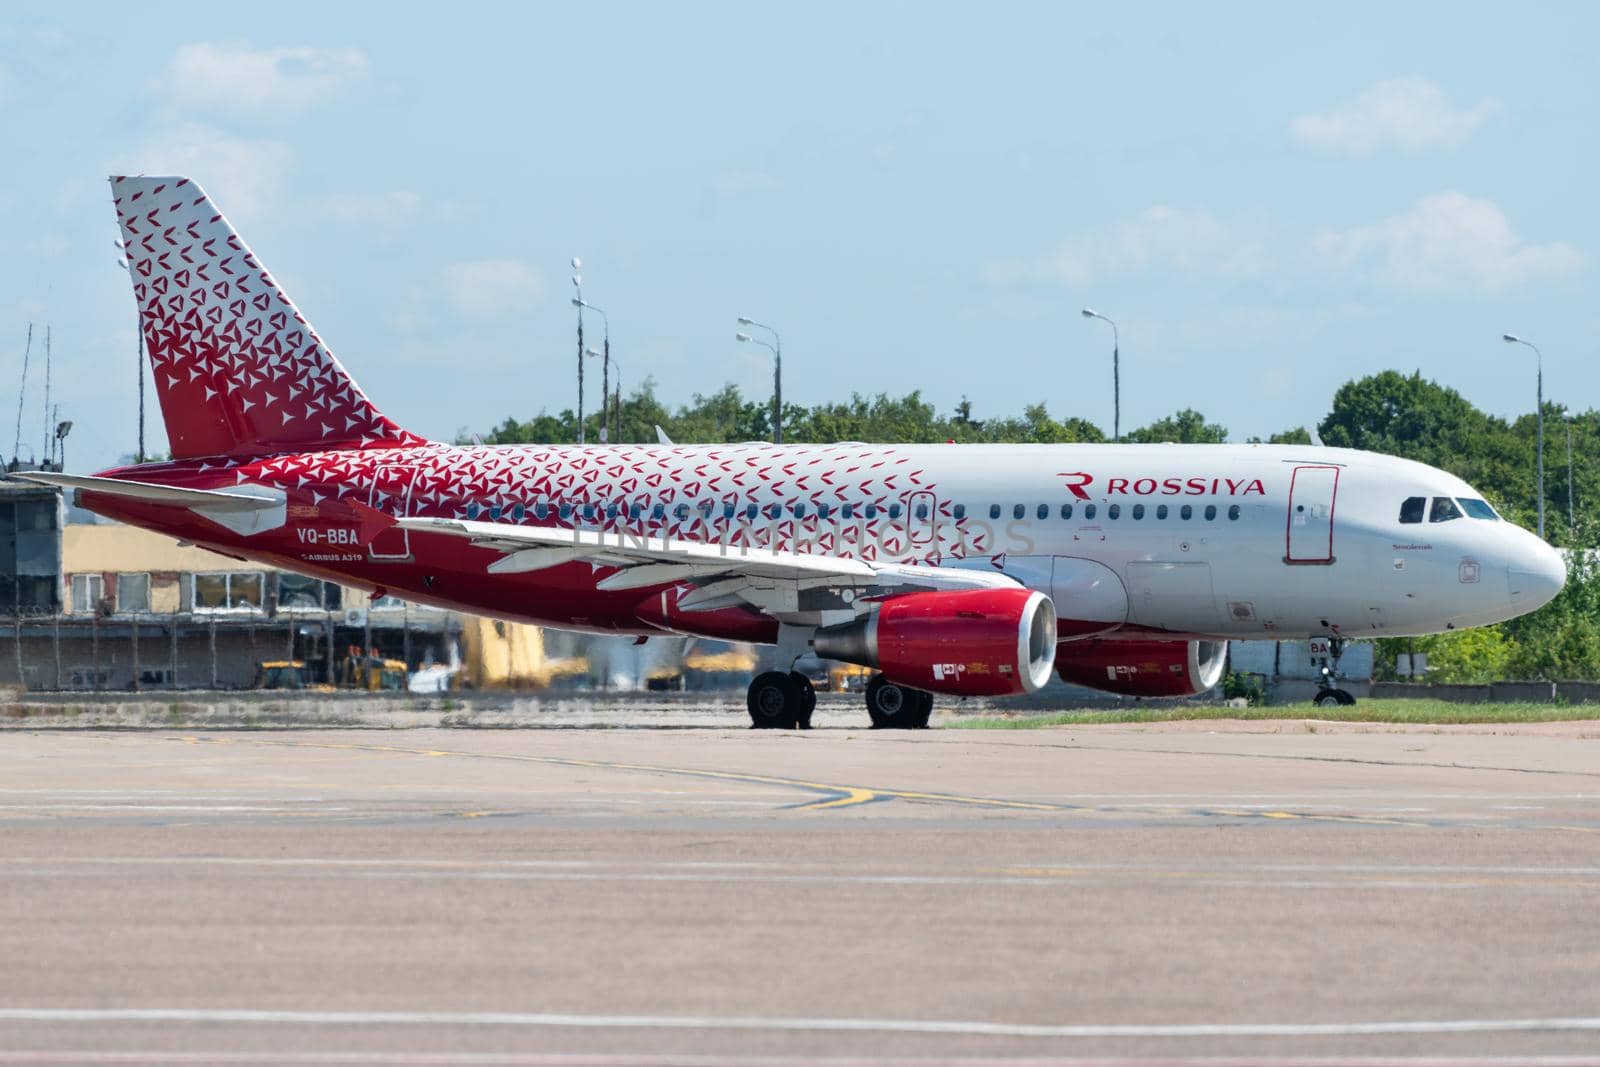 July 2, 2019, Moscow, Russia. Passenger aircraft Airbus A319 of Rossiya airlines at Vnukovo International Airport.